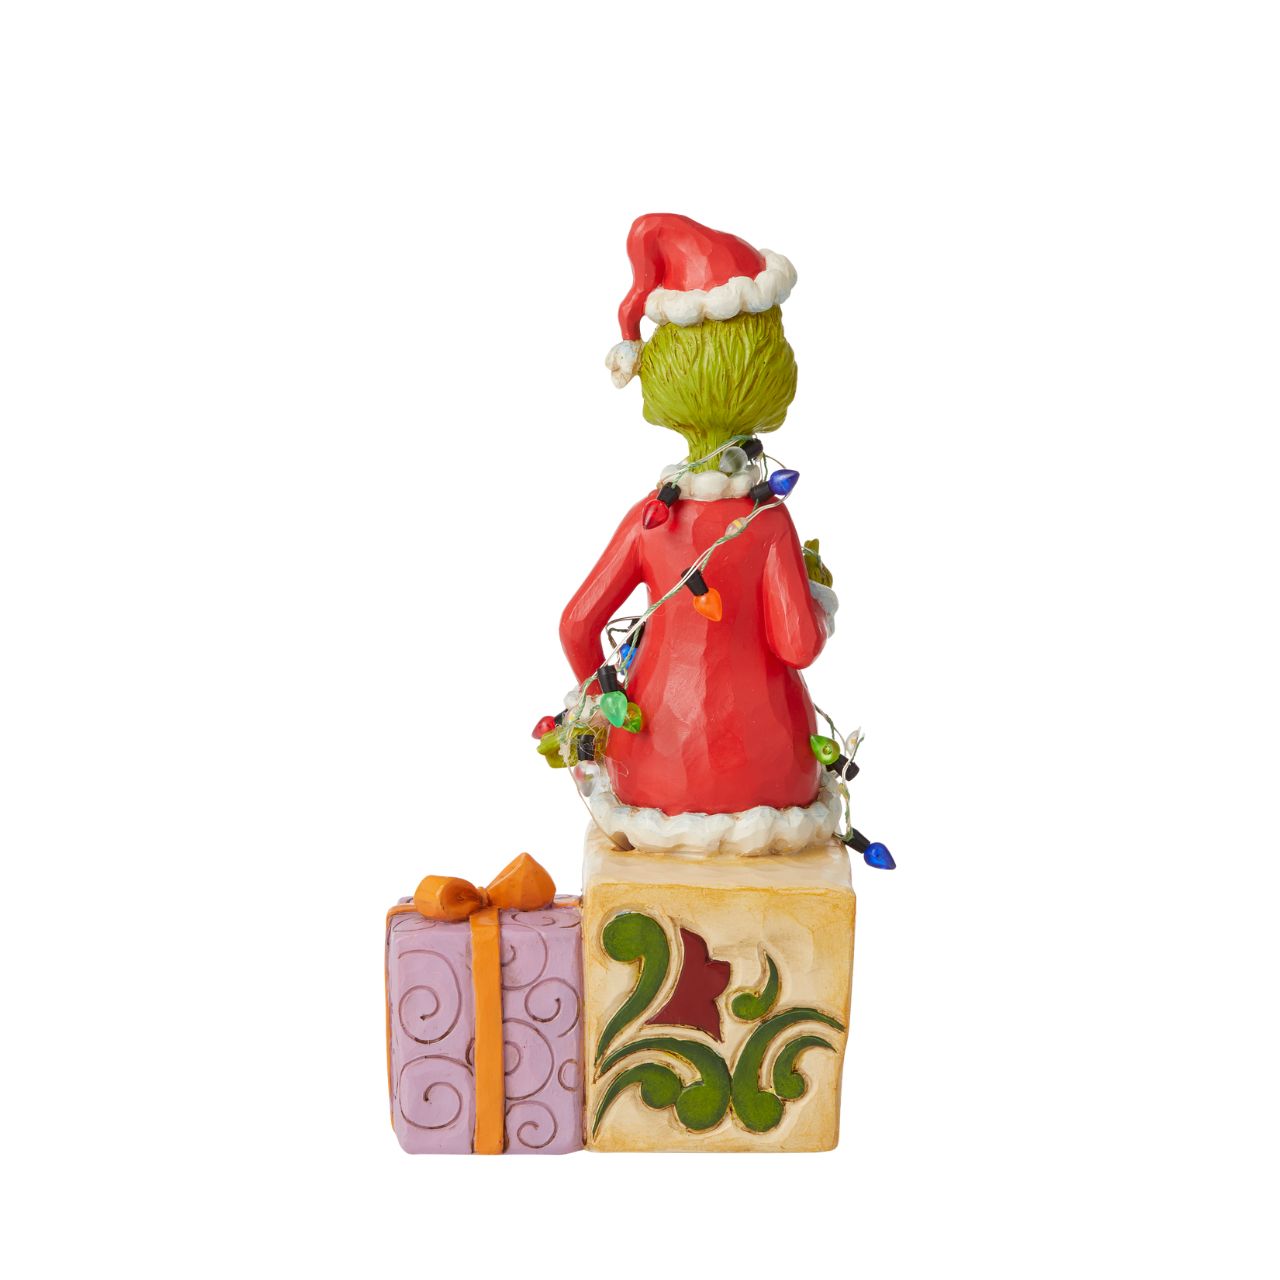 Grinch with lights Figurine - The Grinch  With a grimace on his green grouchy face, the Grinch, by Jim Shore, finds himself wrapped in a glowing string of lights as he tries to ruin the holiday. Sitting on a present, the Grinch gathers himself before he continues stealing Whoville gifts.